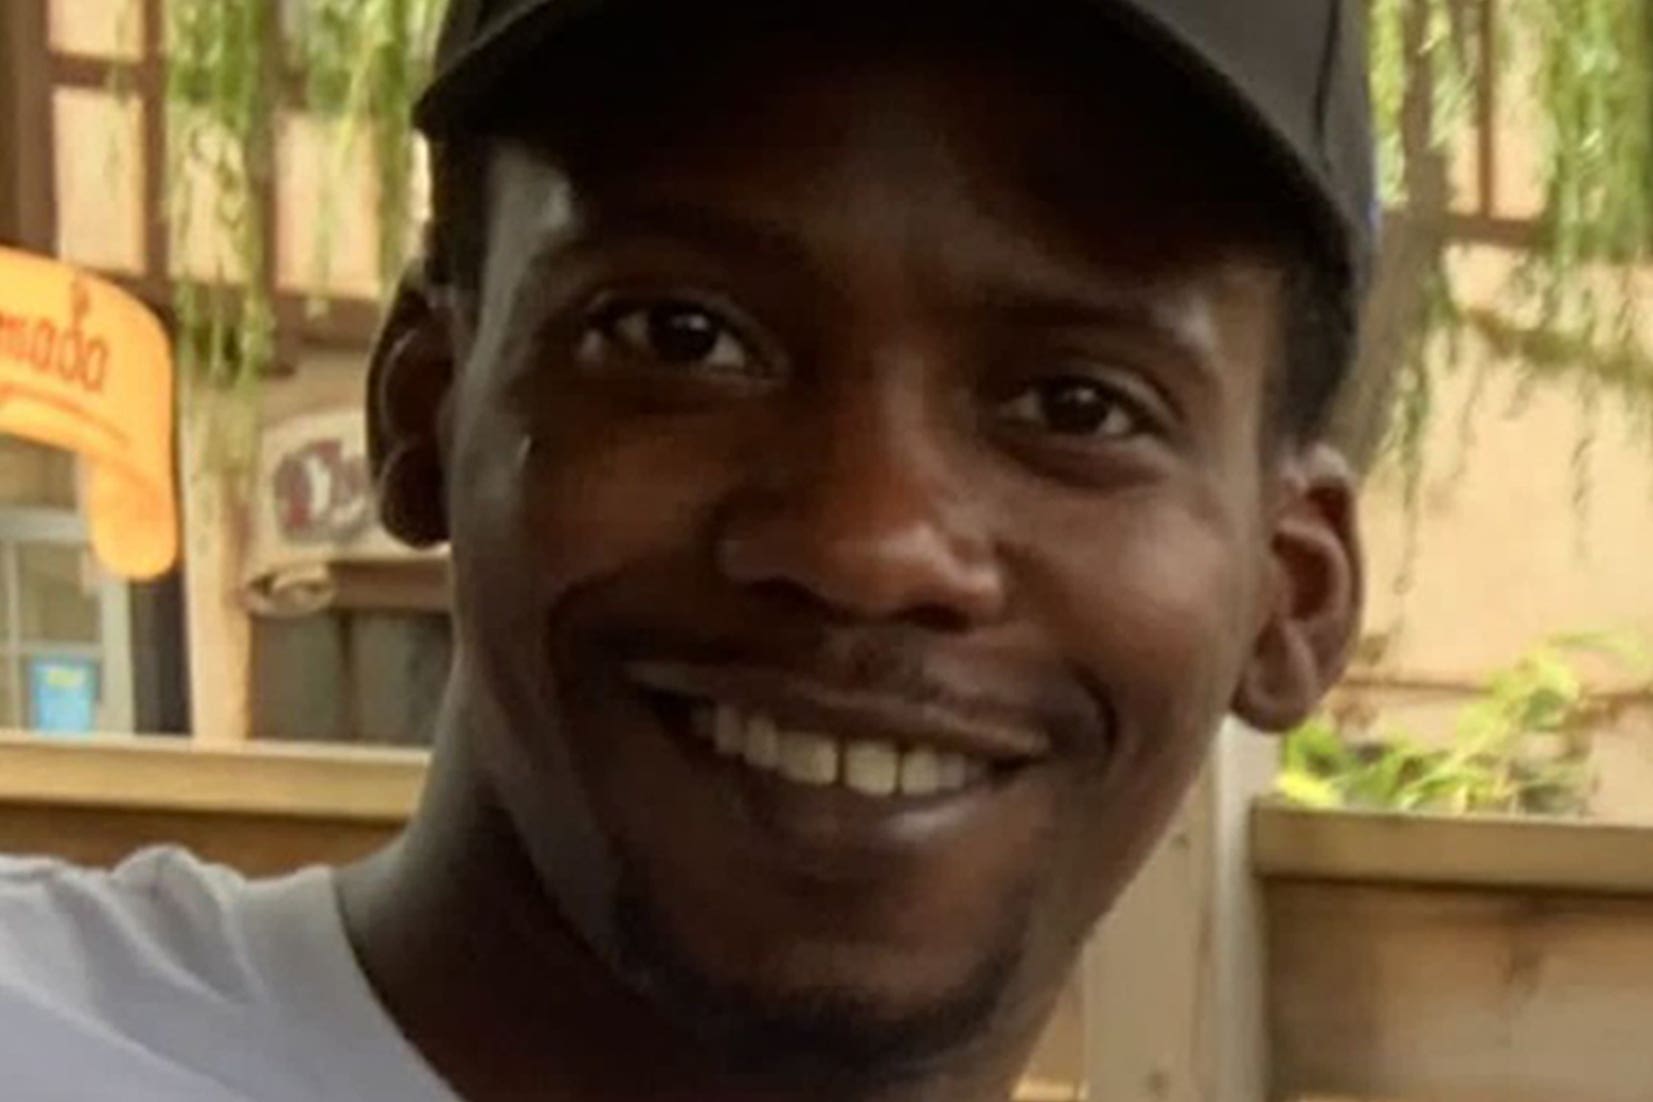 Last month, brothers Paul and Matthew Yusuff and their friend Moussa Traore were initially unanimously acquitted by jurors of offences relating to the fatal stabbing of 32-year-old Adrian Keise (pictured) outside Waterloo station in London (PA)